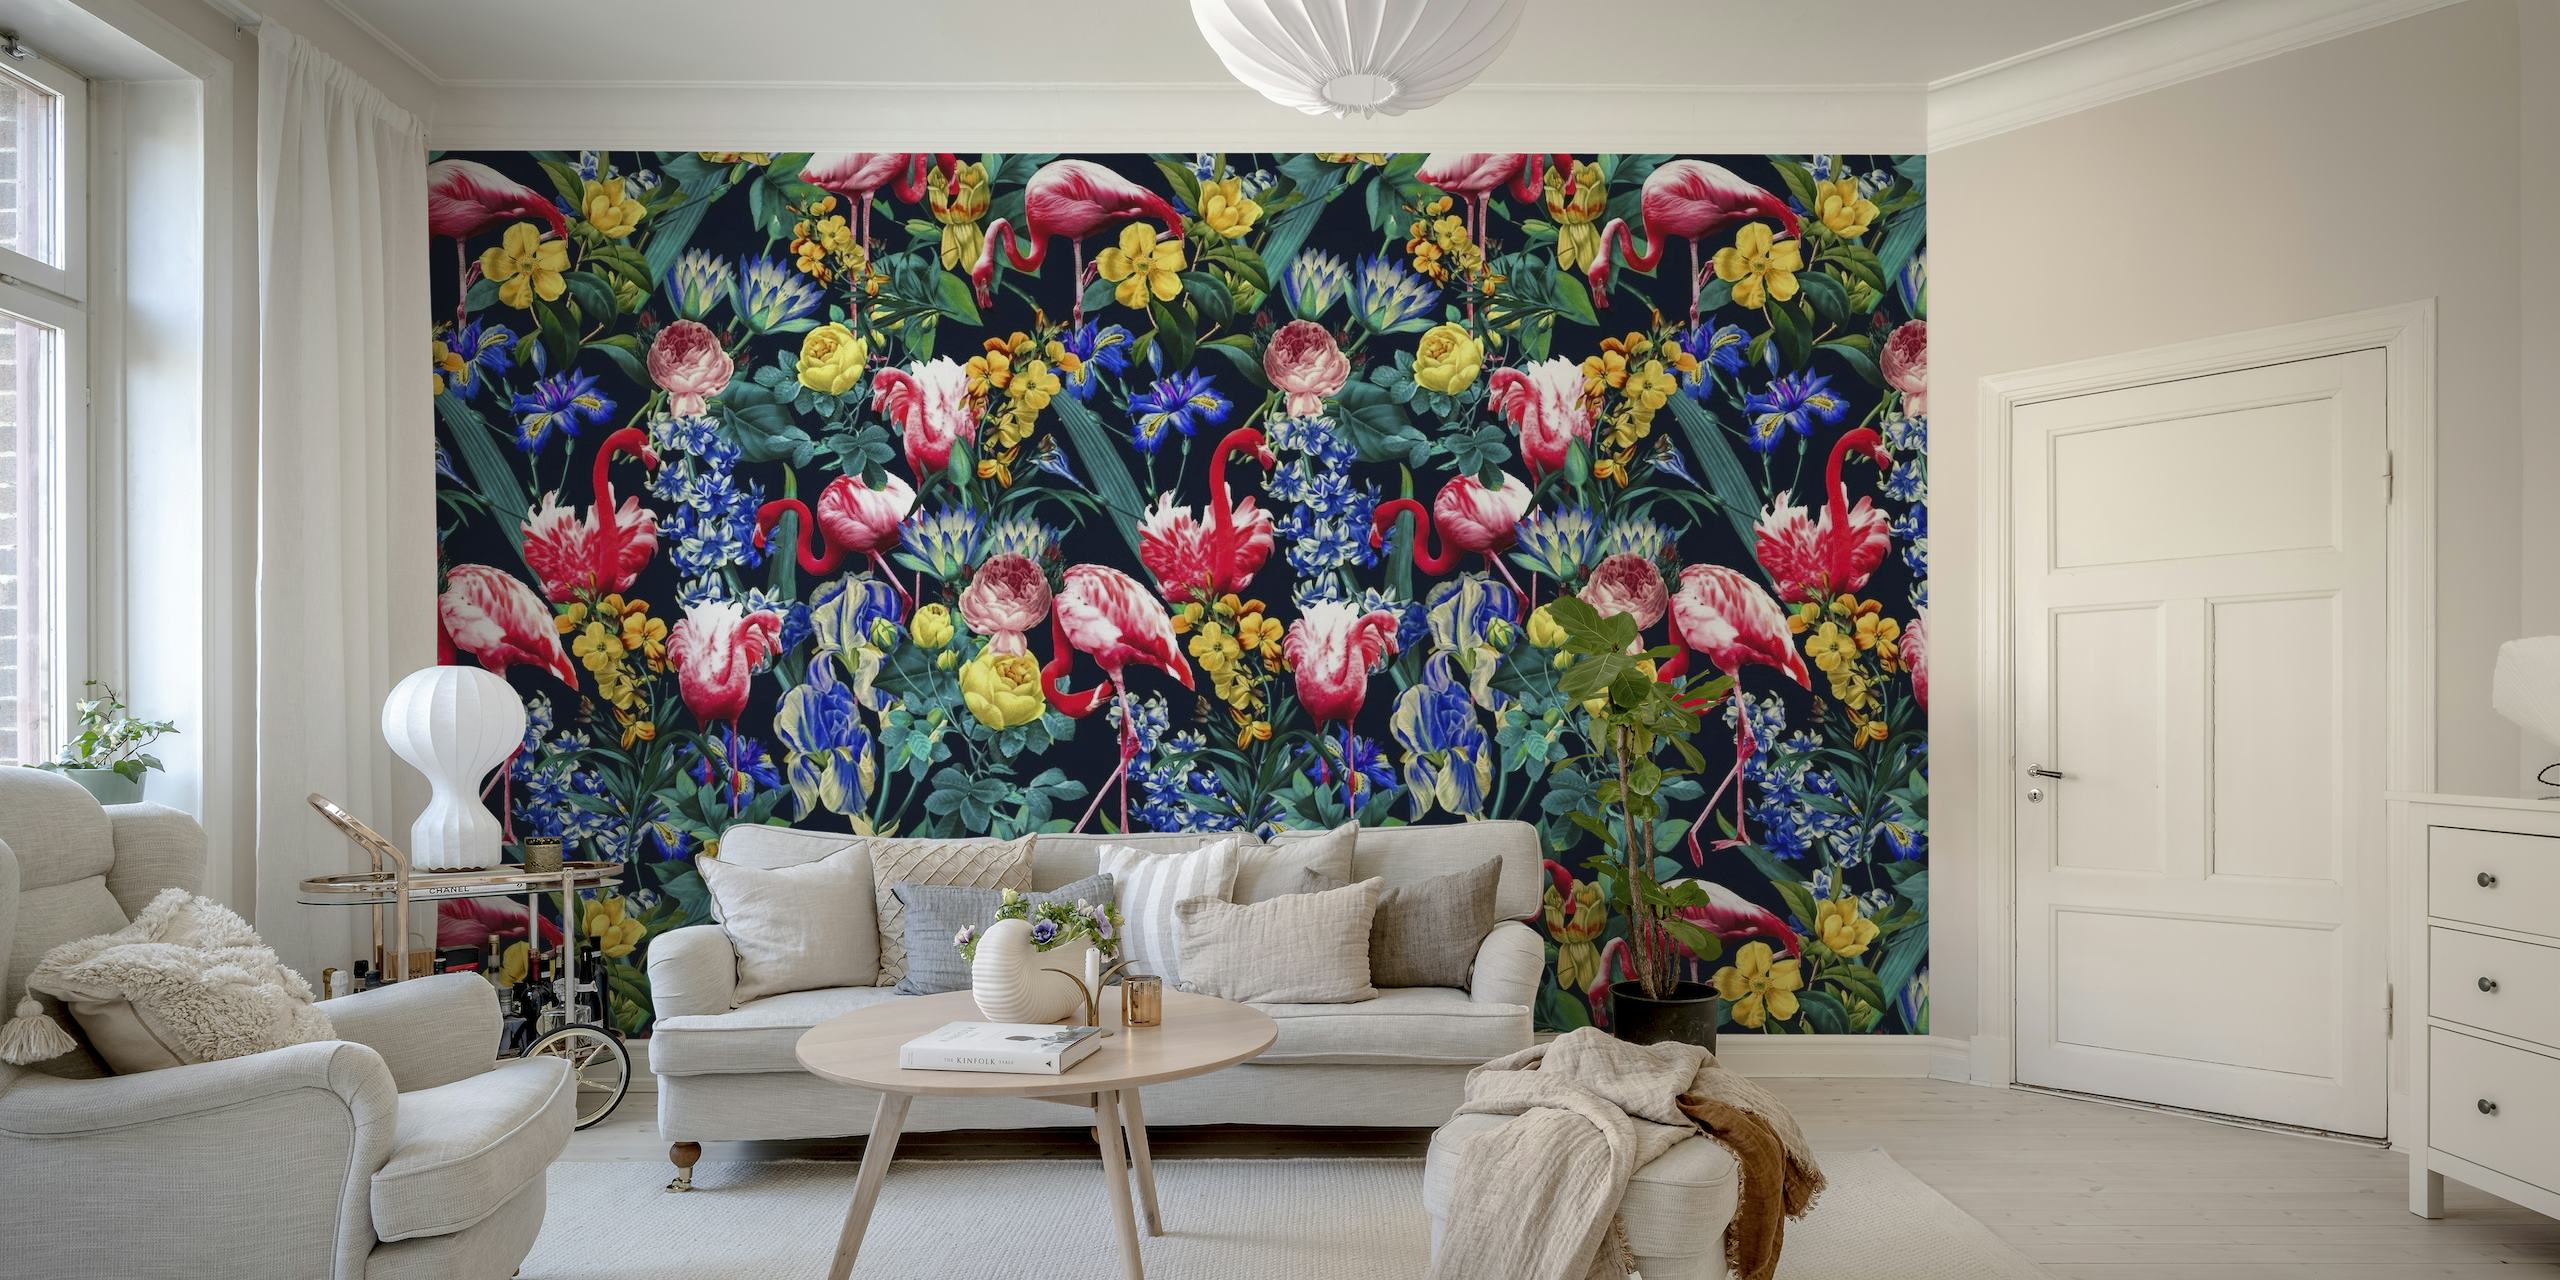 Floral and Flamingo V Pattern wall mural with vibrant flowers and flamingos on dark background